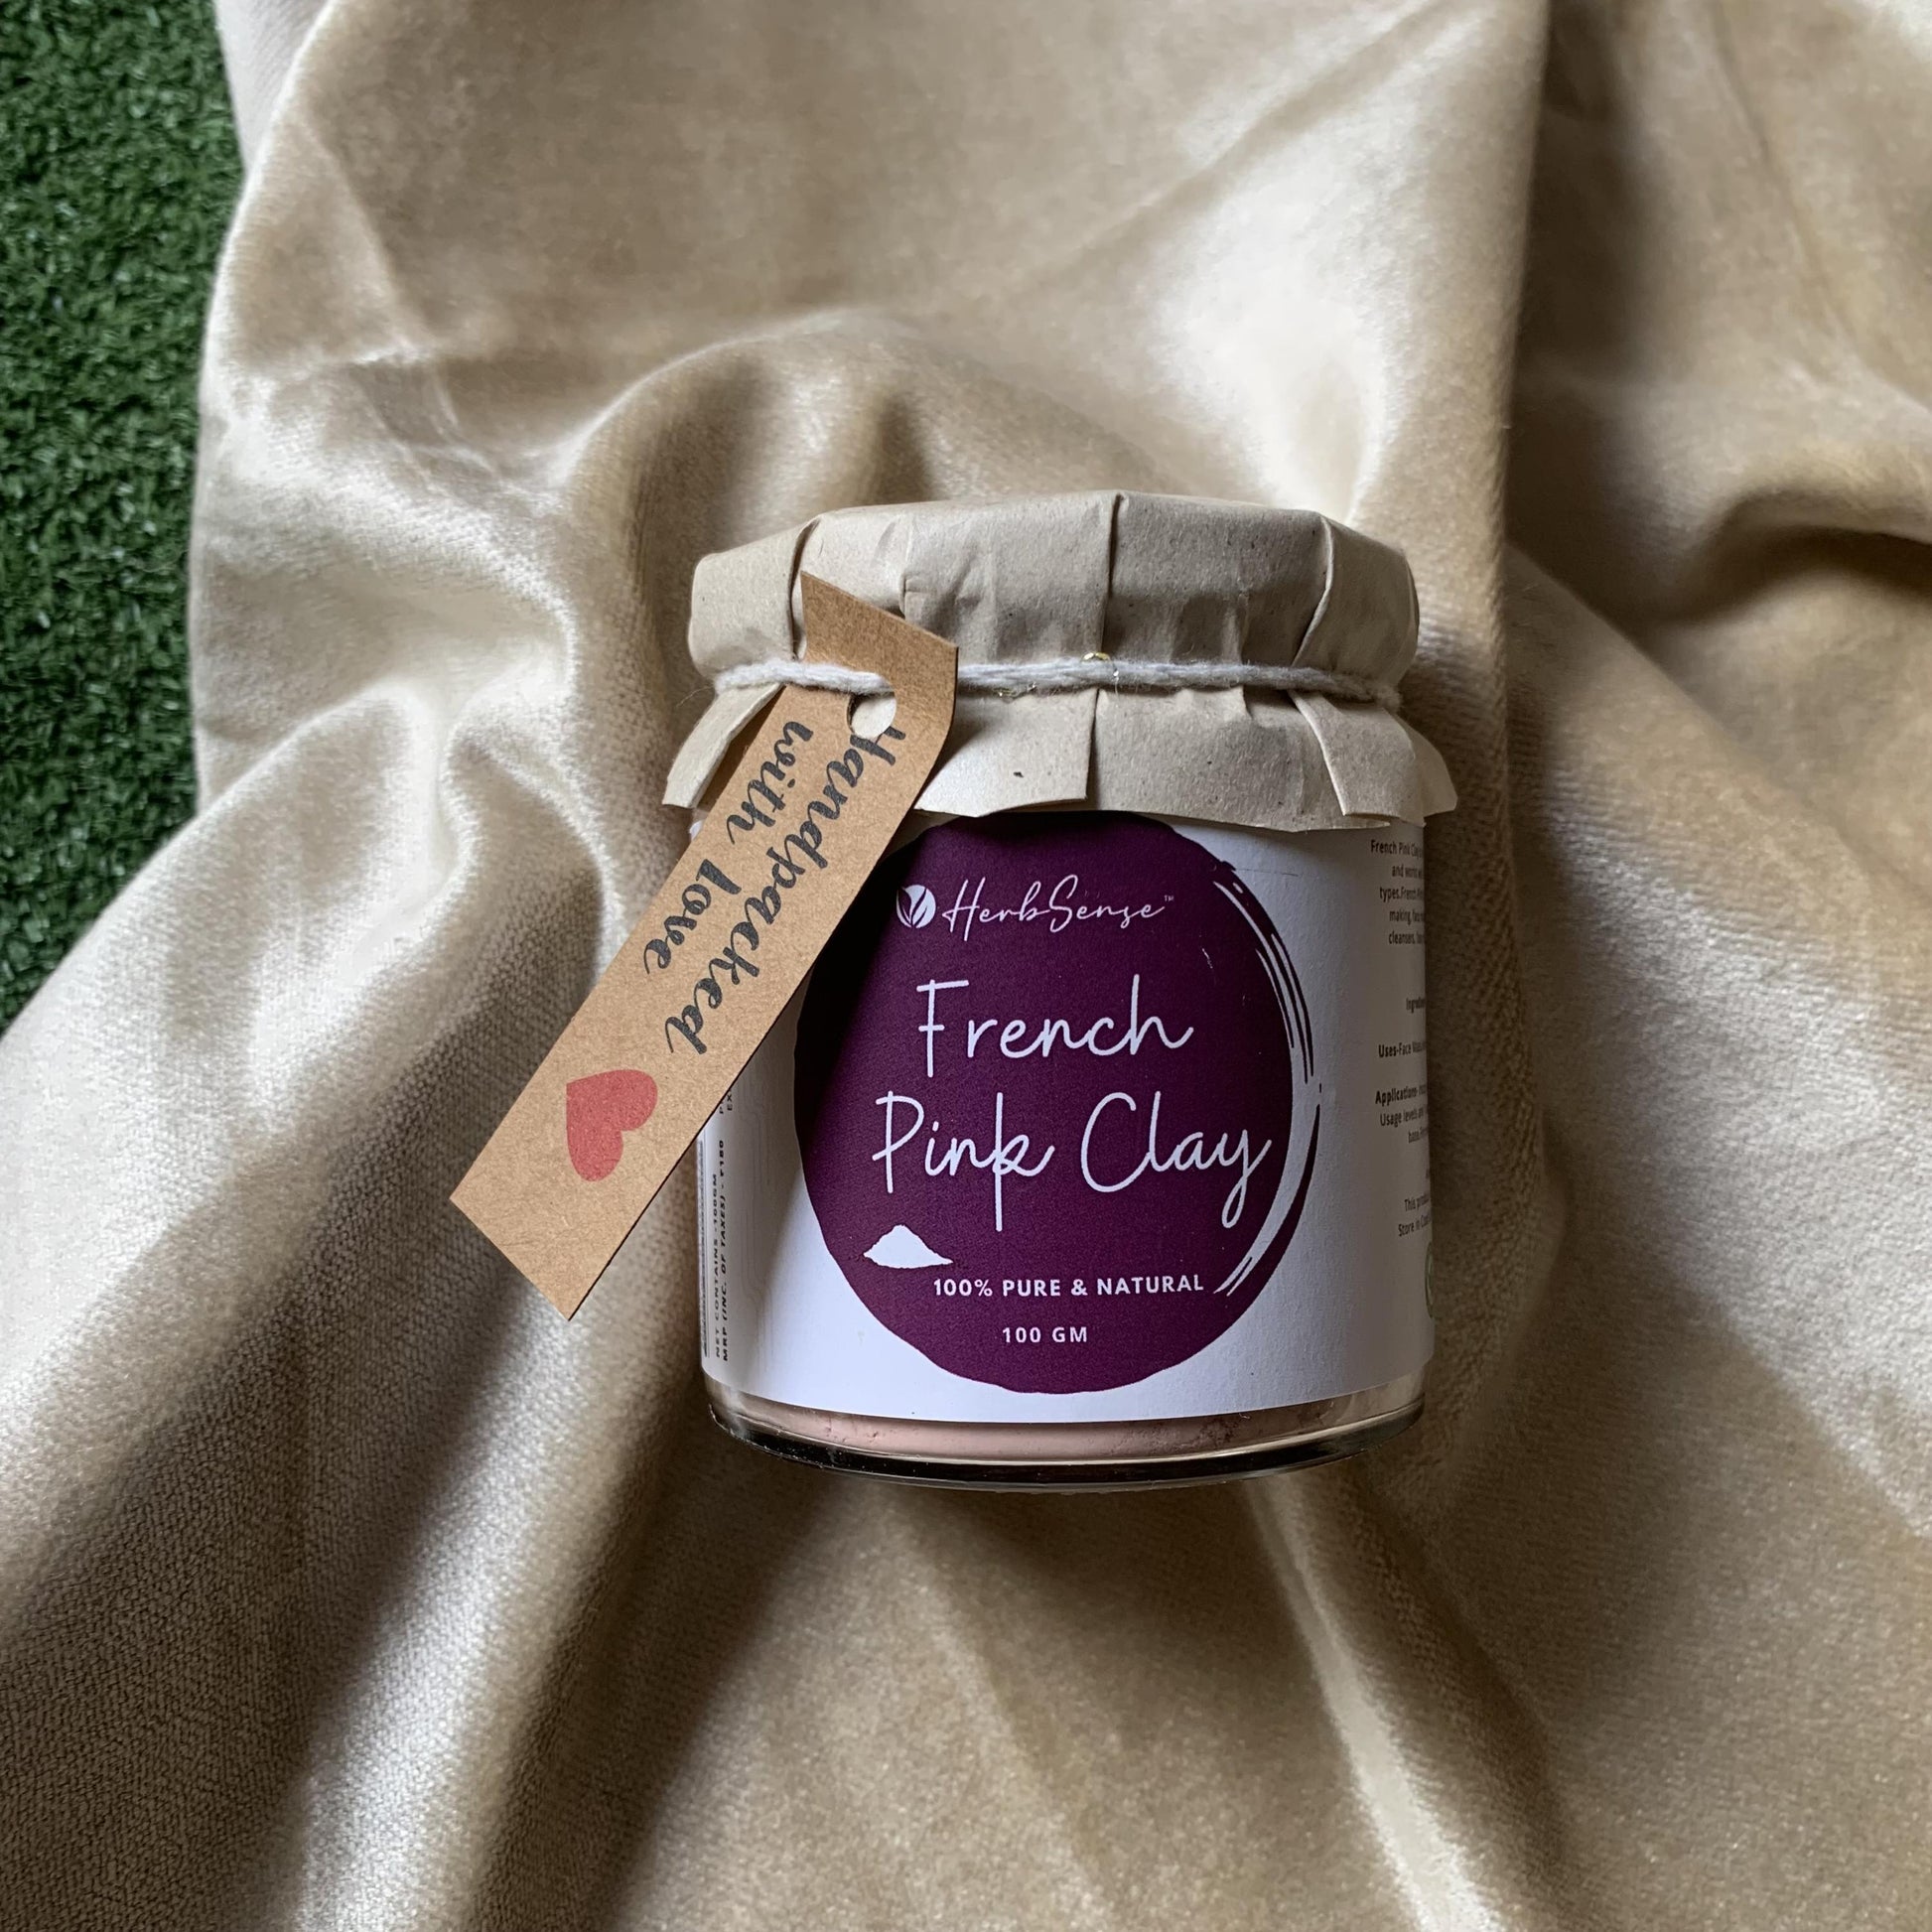 French Pink Clay For Glowing & Healthy Skin,Cleanse & Detoxify | Glass Jar Packaging 100 GM - Herbsense